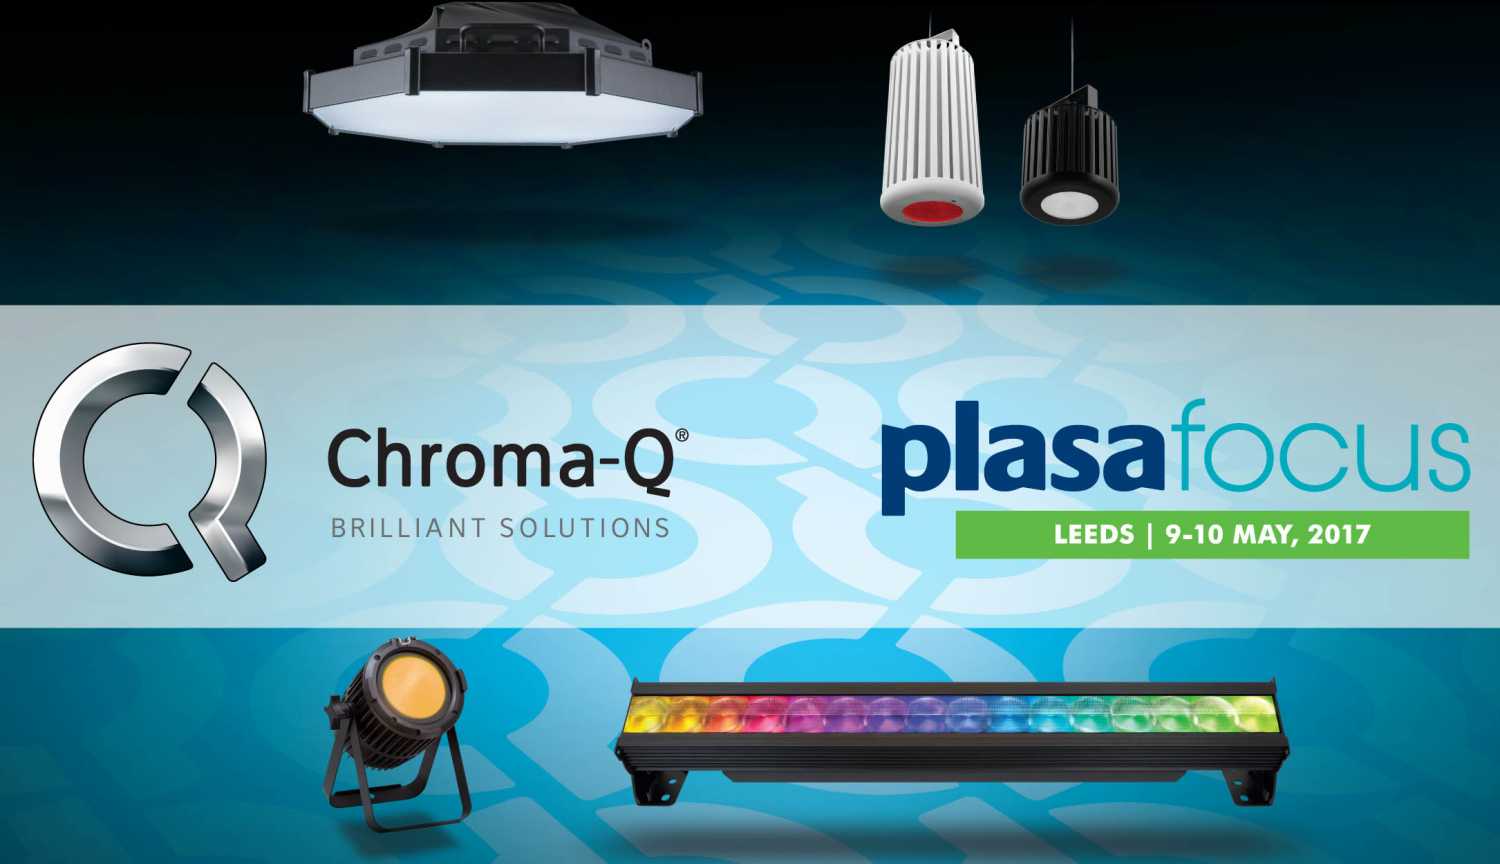 The latest Chroma-Q products will be showcased at Leeds next month